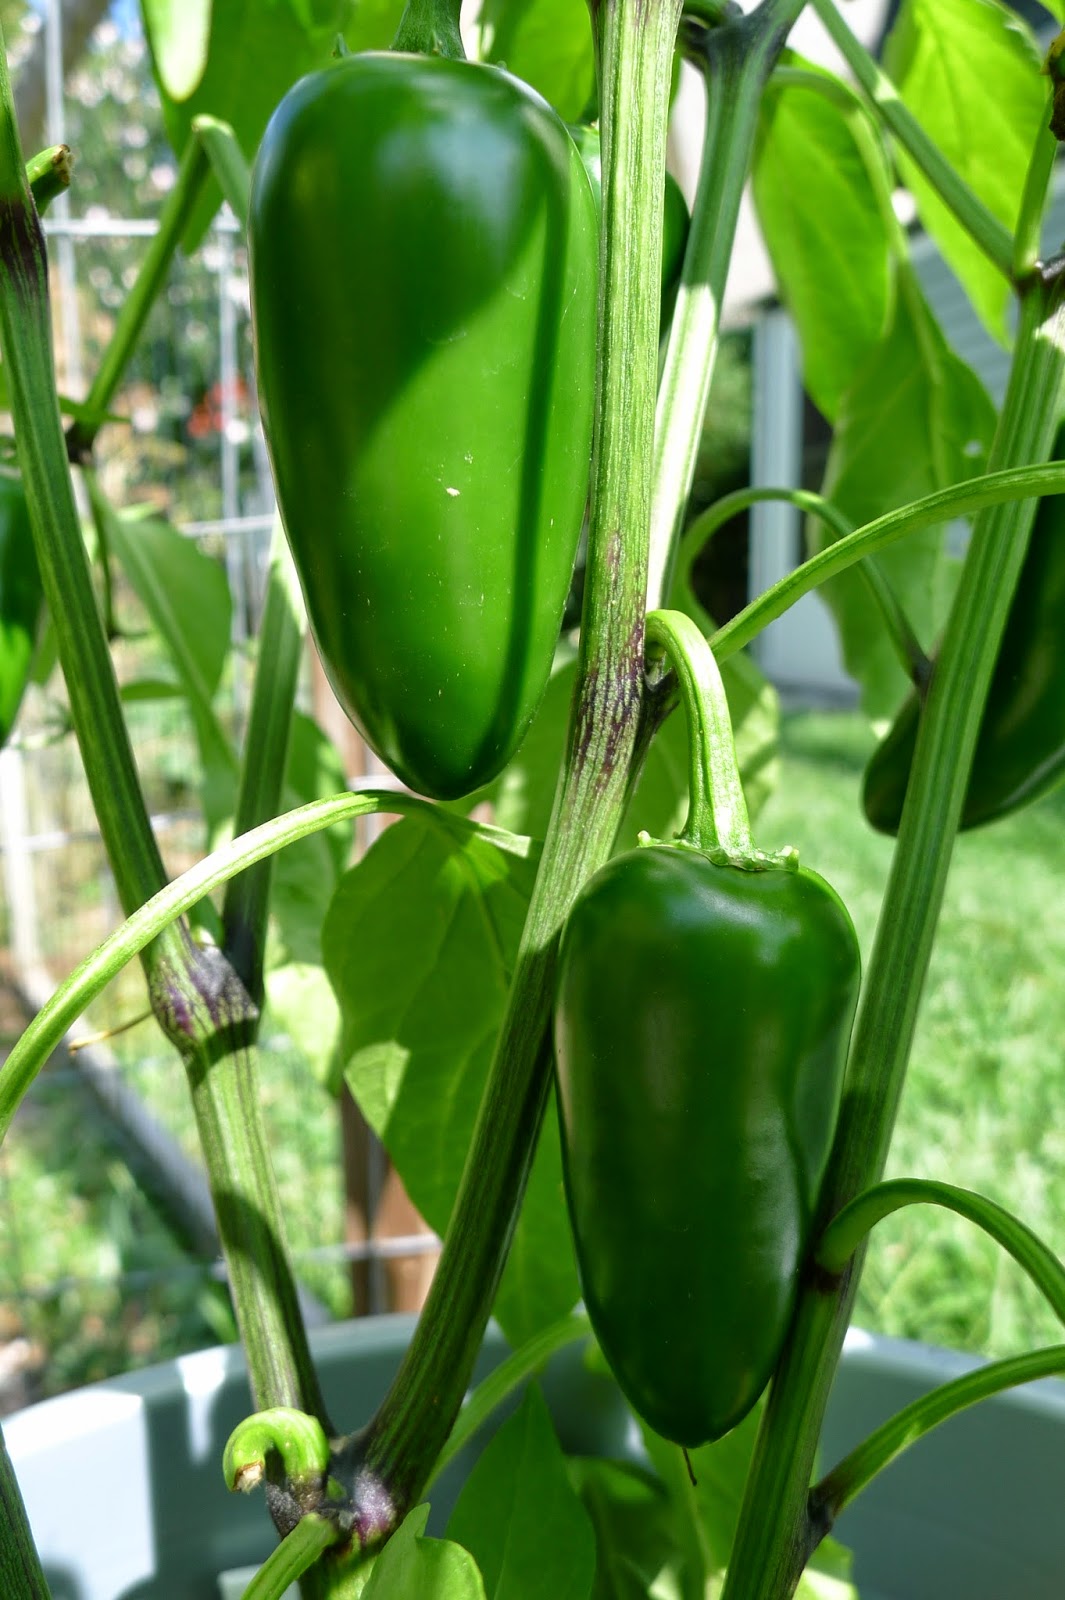 Goliath Jalapeno Peppers